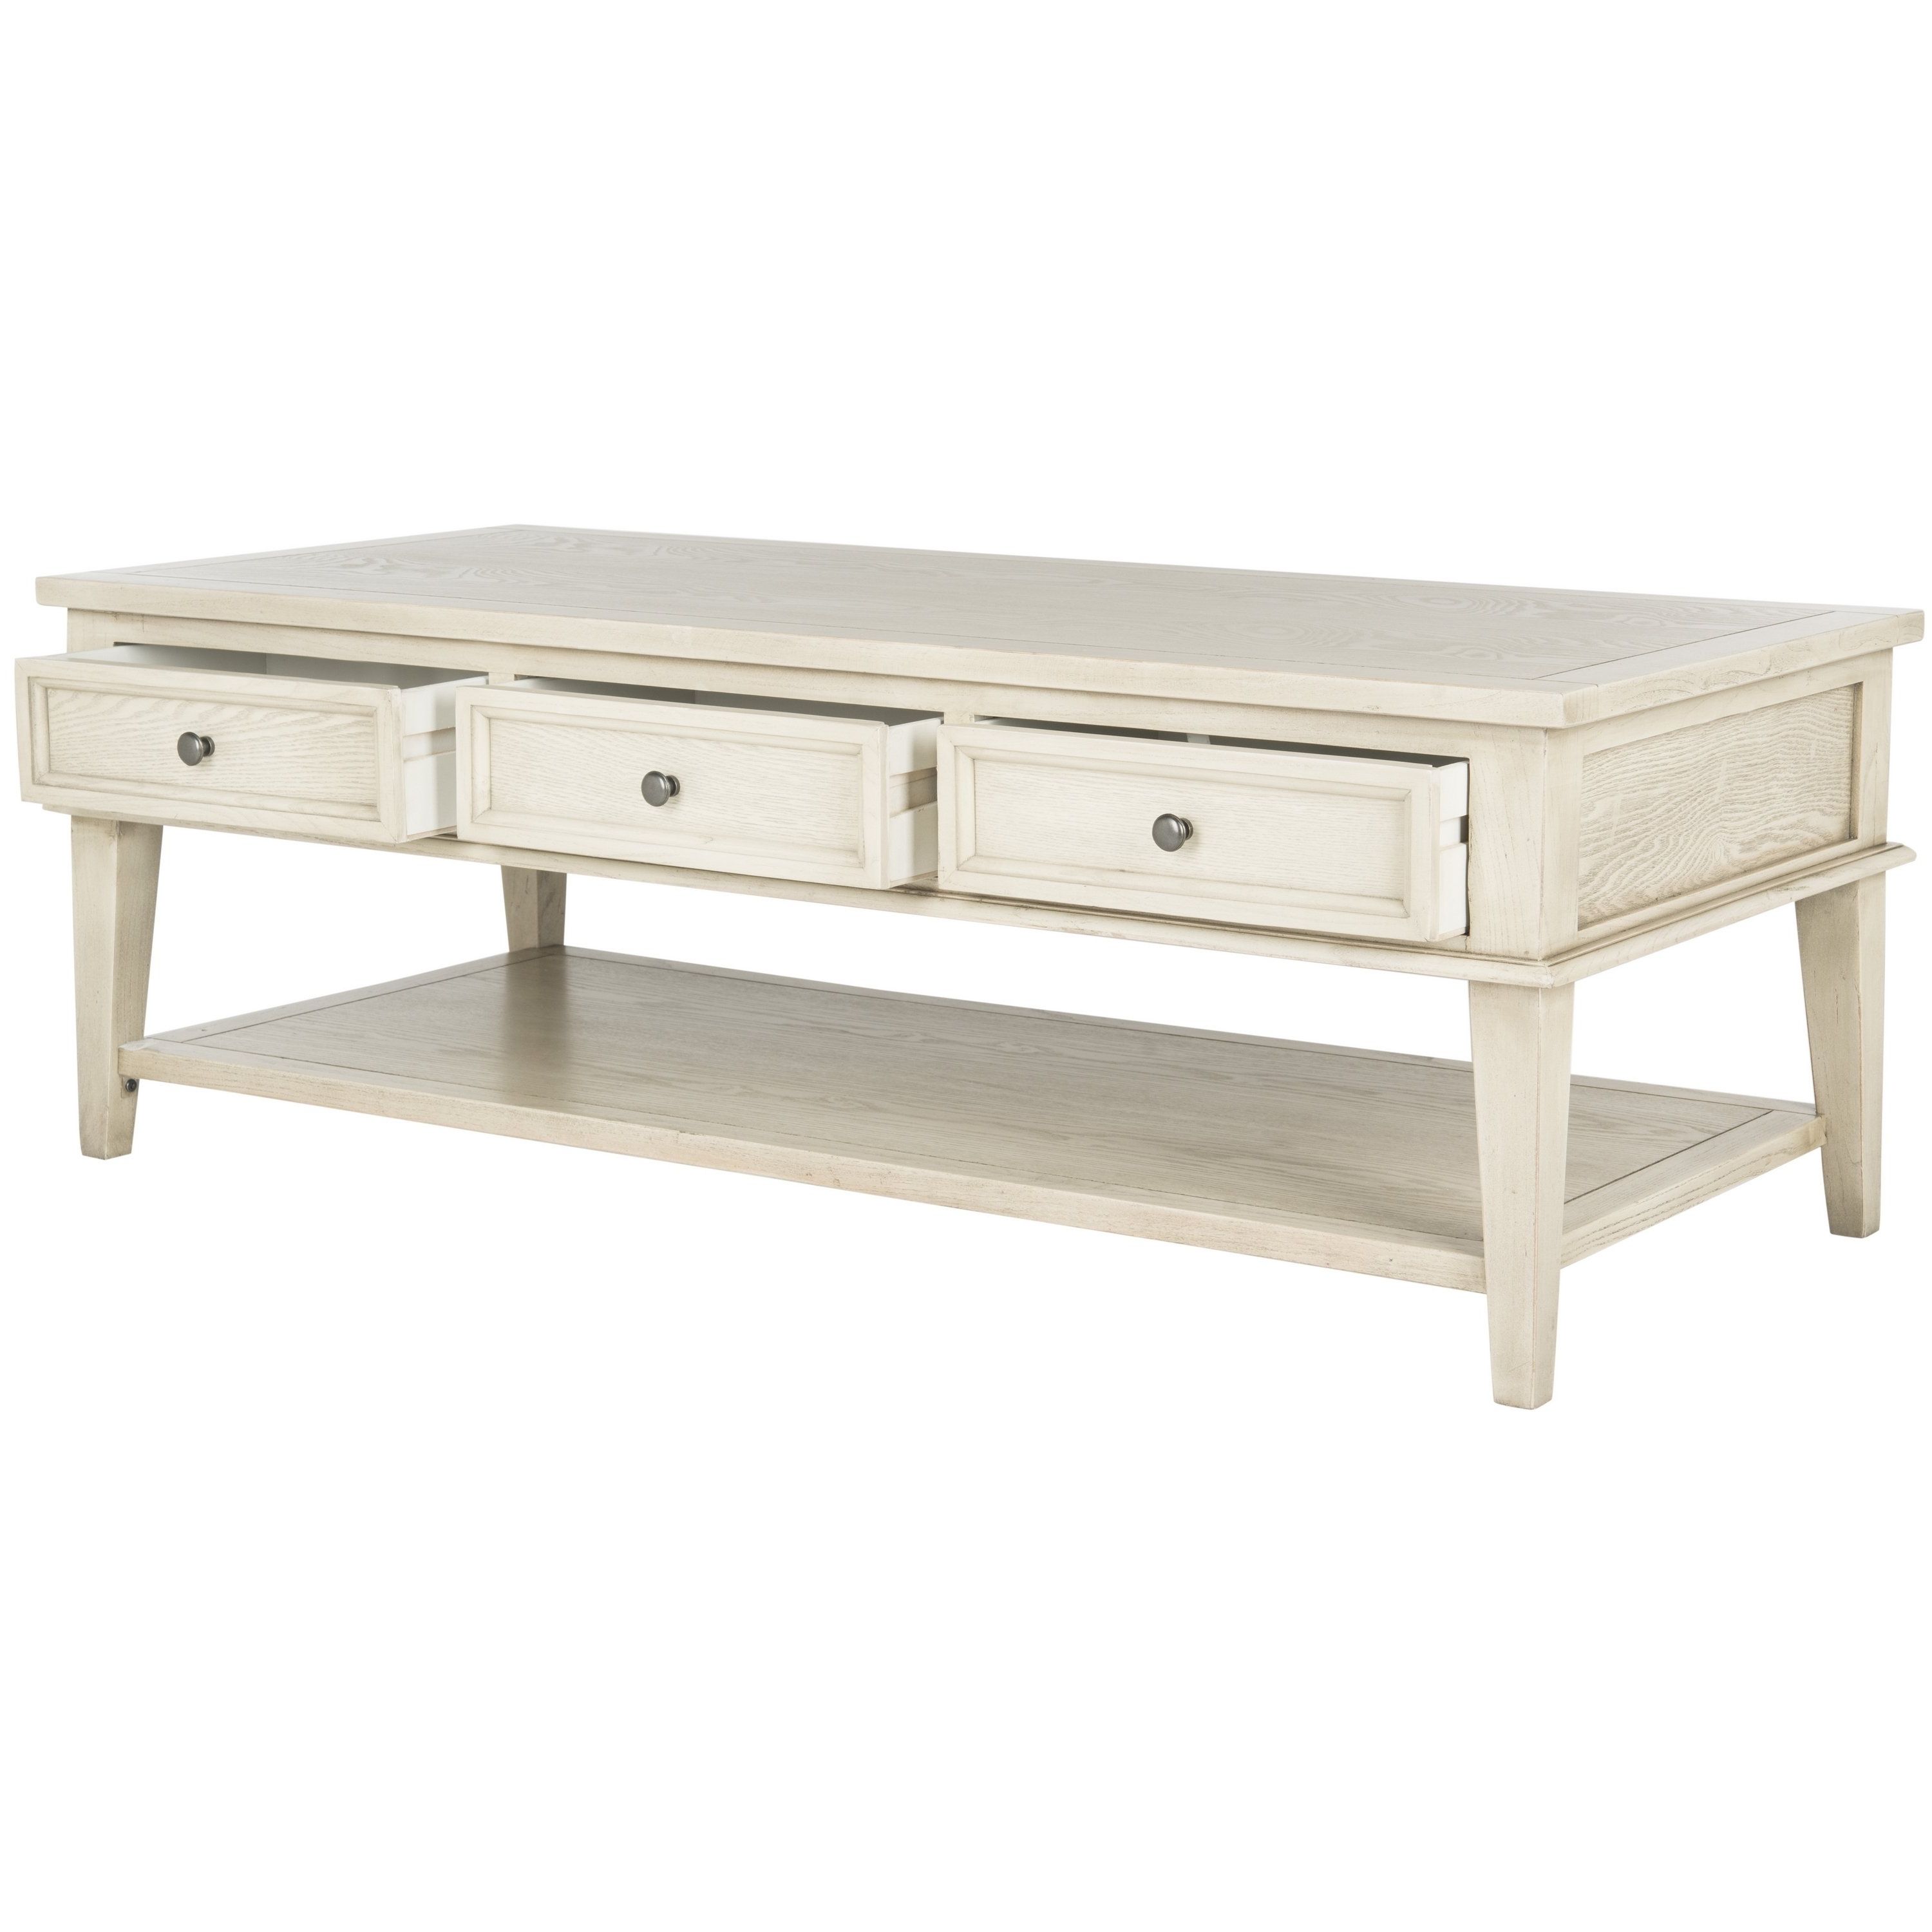 Current Shop Safavieh Manelin White Washed Coffee Table – On Sale – Free In Candice Ii Storage Cocktail Tables (View 8 of 20)